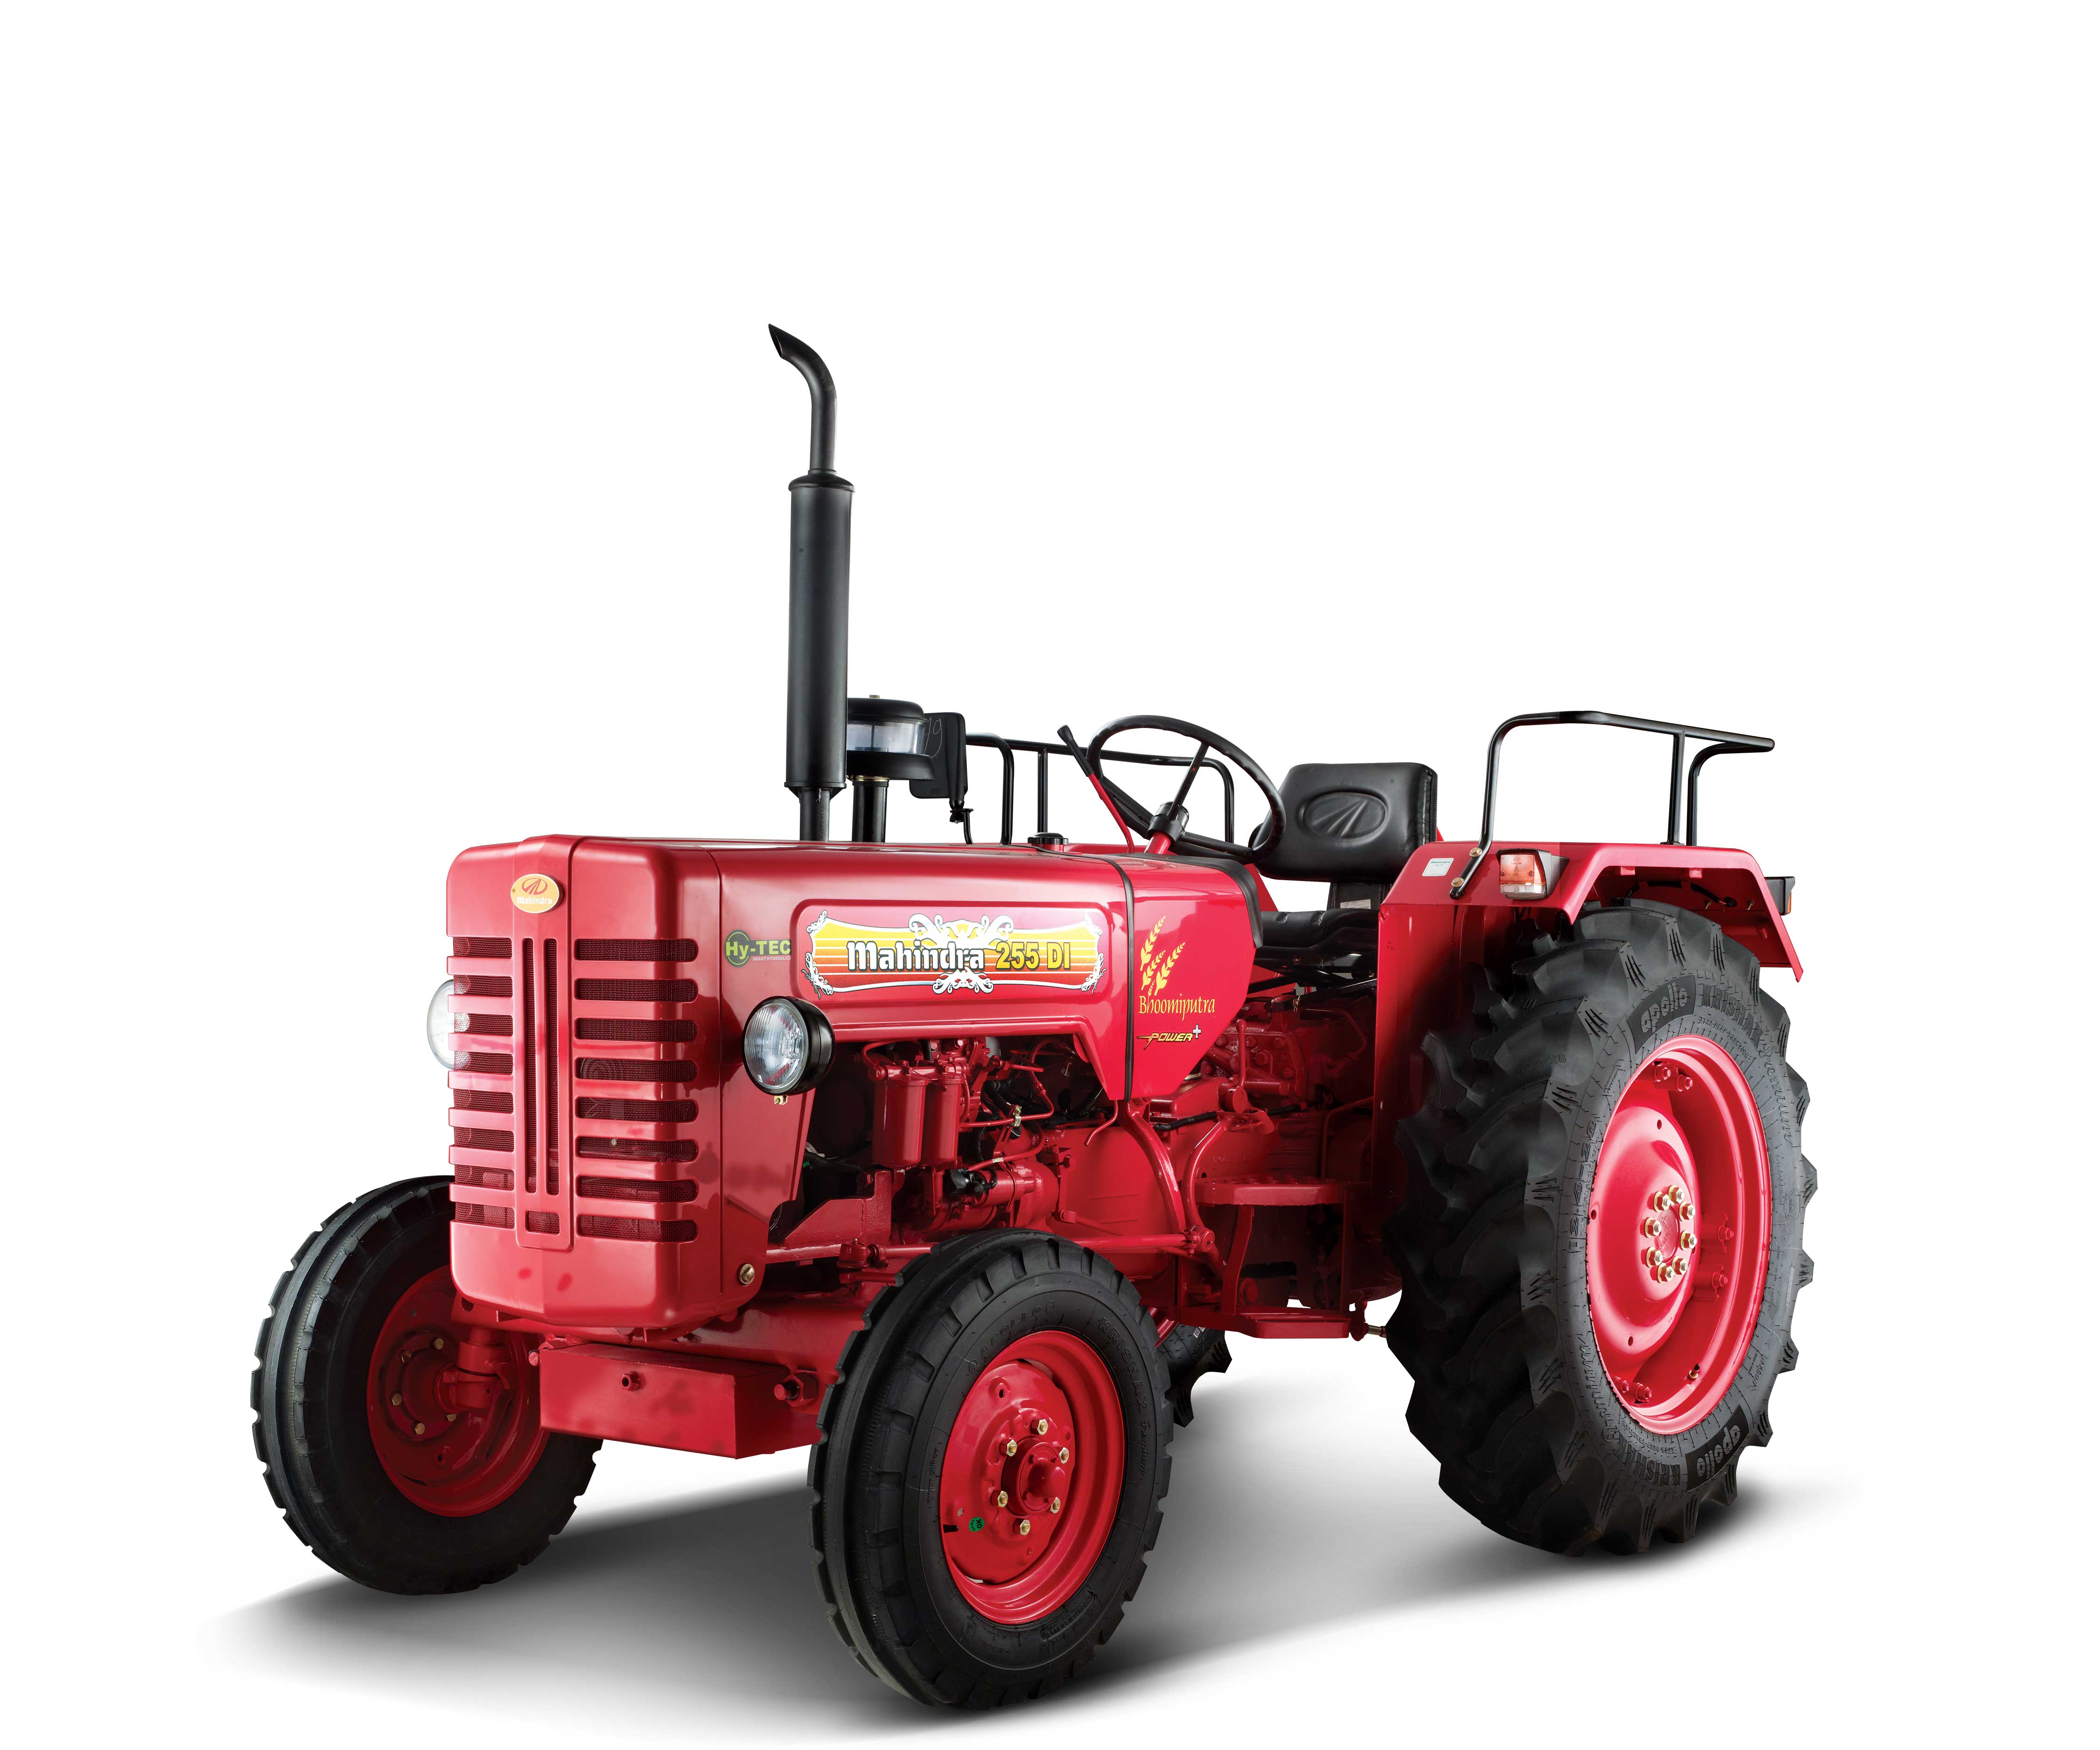 Tractor Wallpaper High Quality